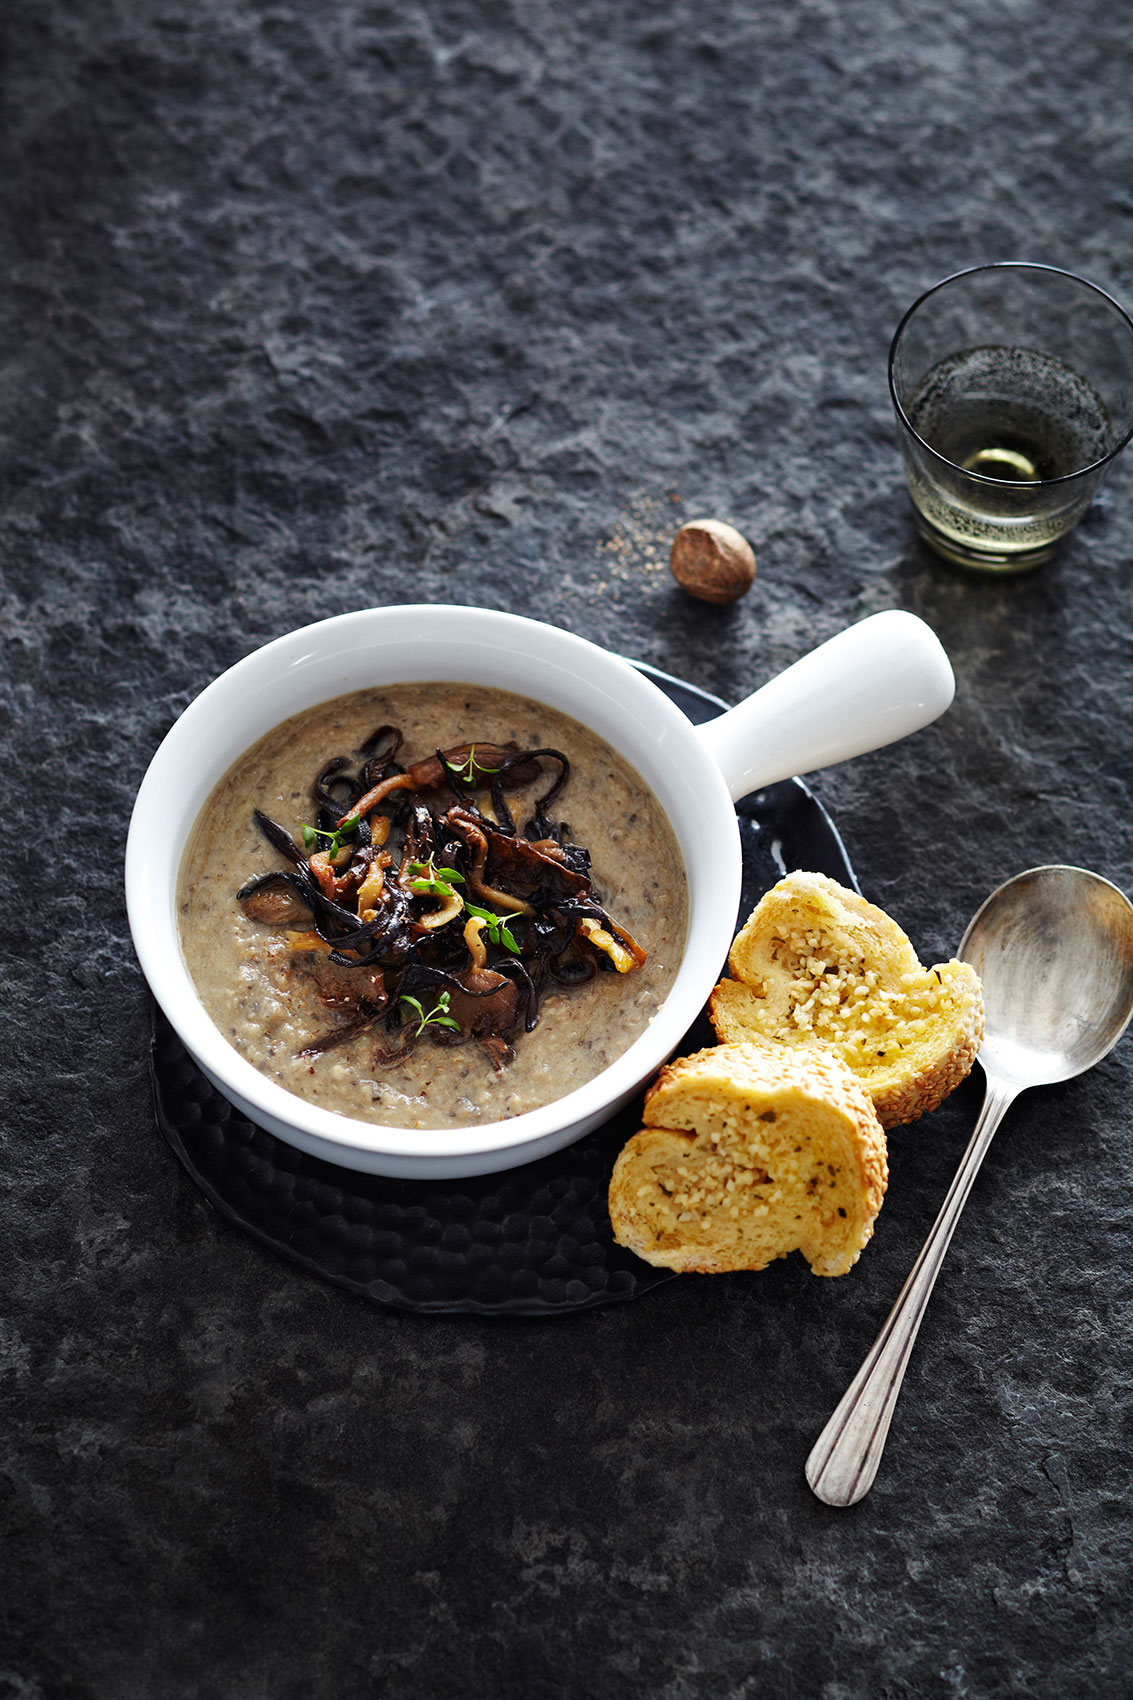 Spice Health Heroes • Mushroom Soup & Garlic Bread with Ground Nutmeg • Cookbook & Editorial Food Photography